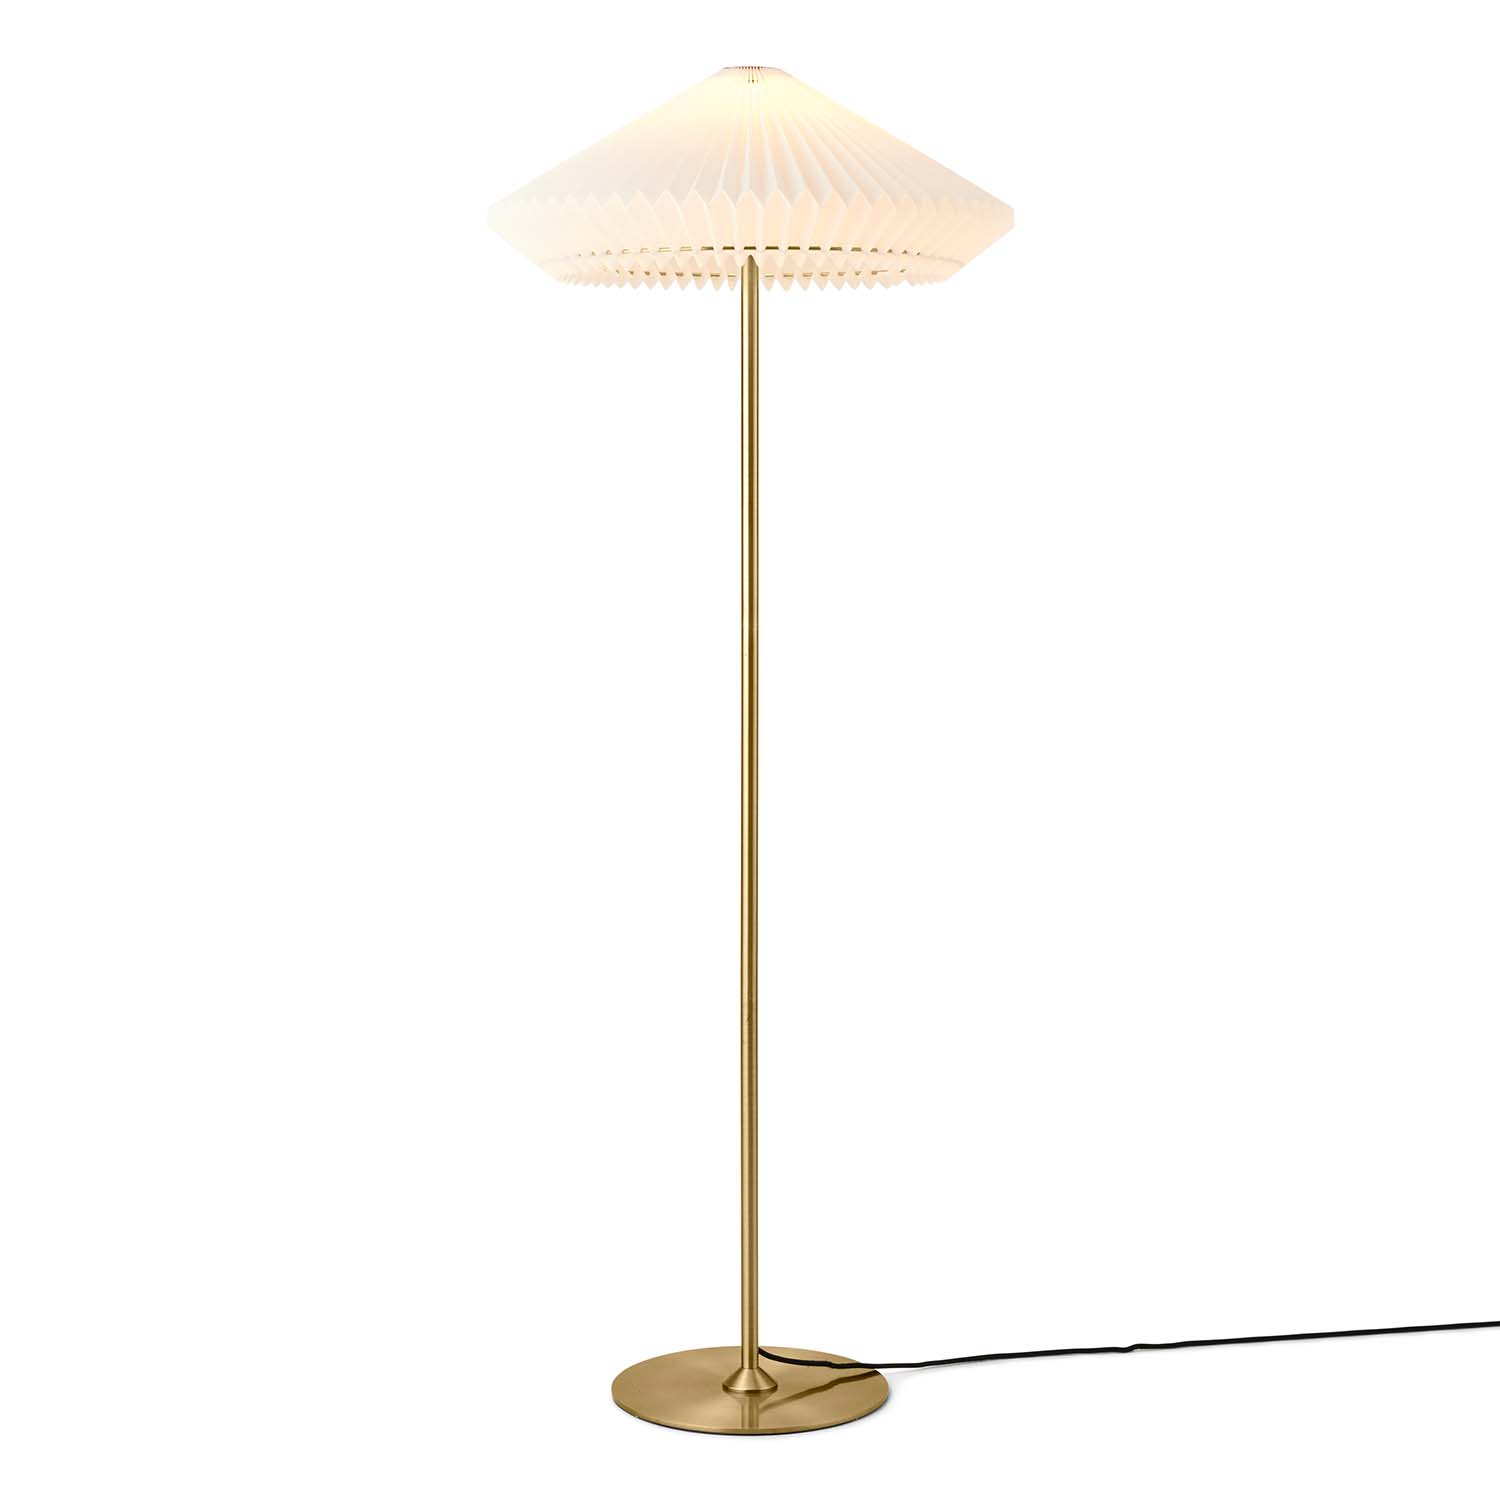 PARIS - Vintage pleated floor lamp with conical design